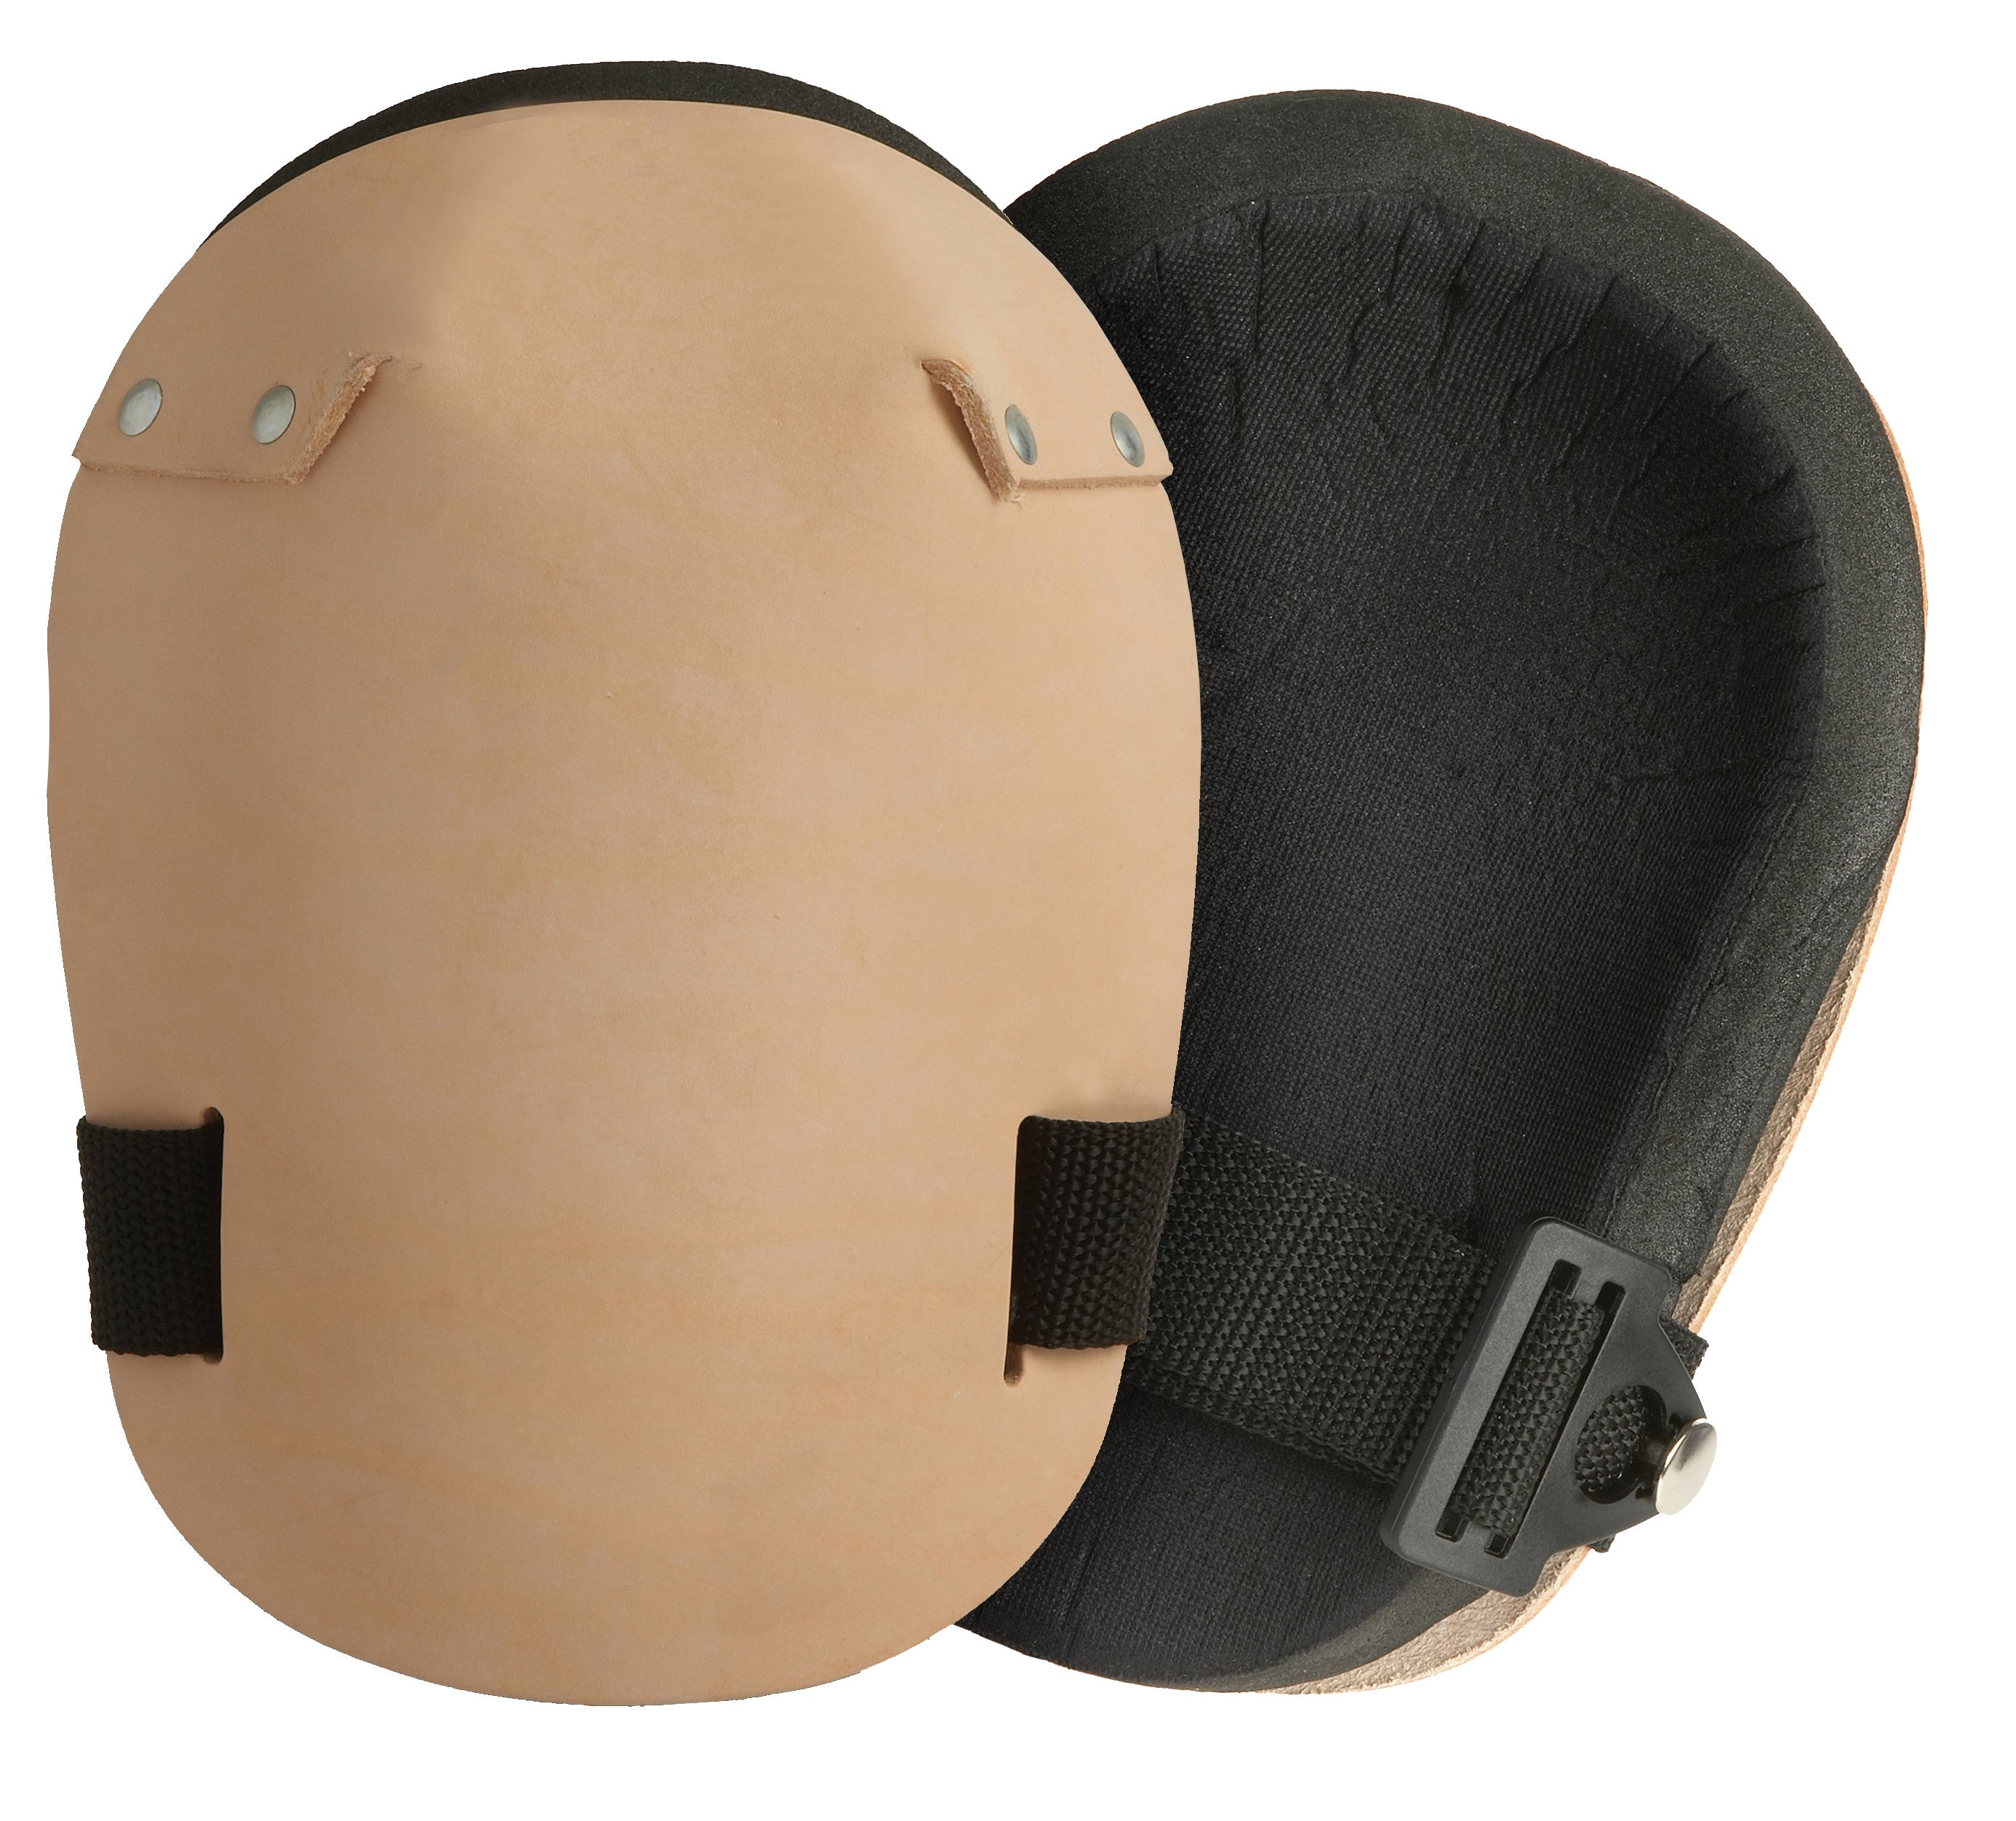 Knee Pads Leather-eSafety Supplies, Inc